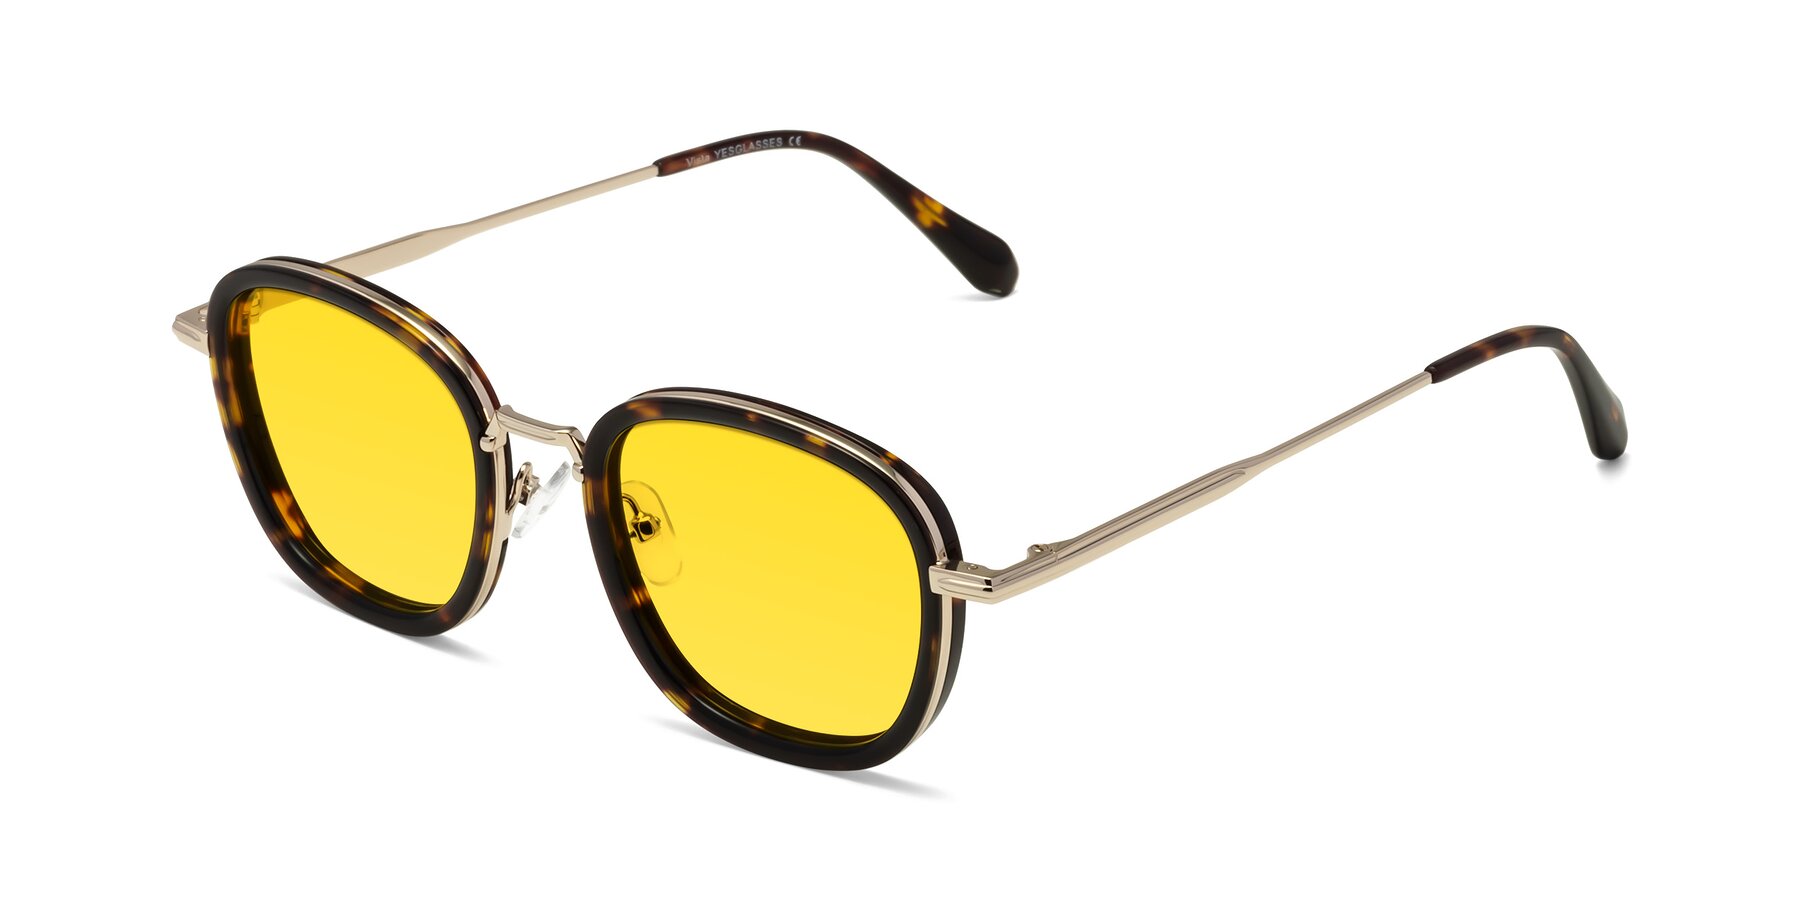 Angle of Vista in Tortoise-Light Gold with Yellow Tinted Lenses